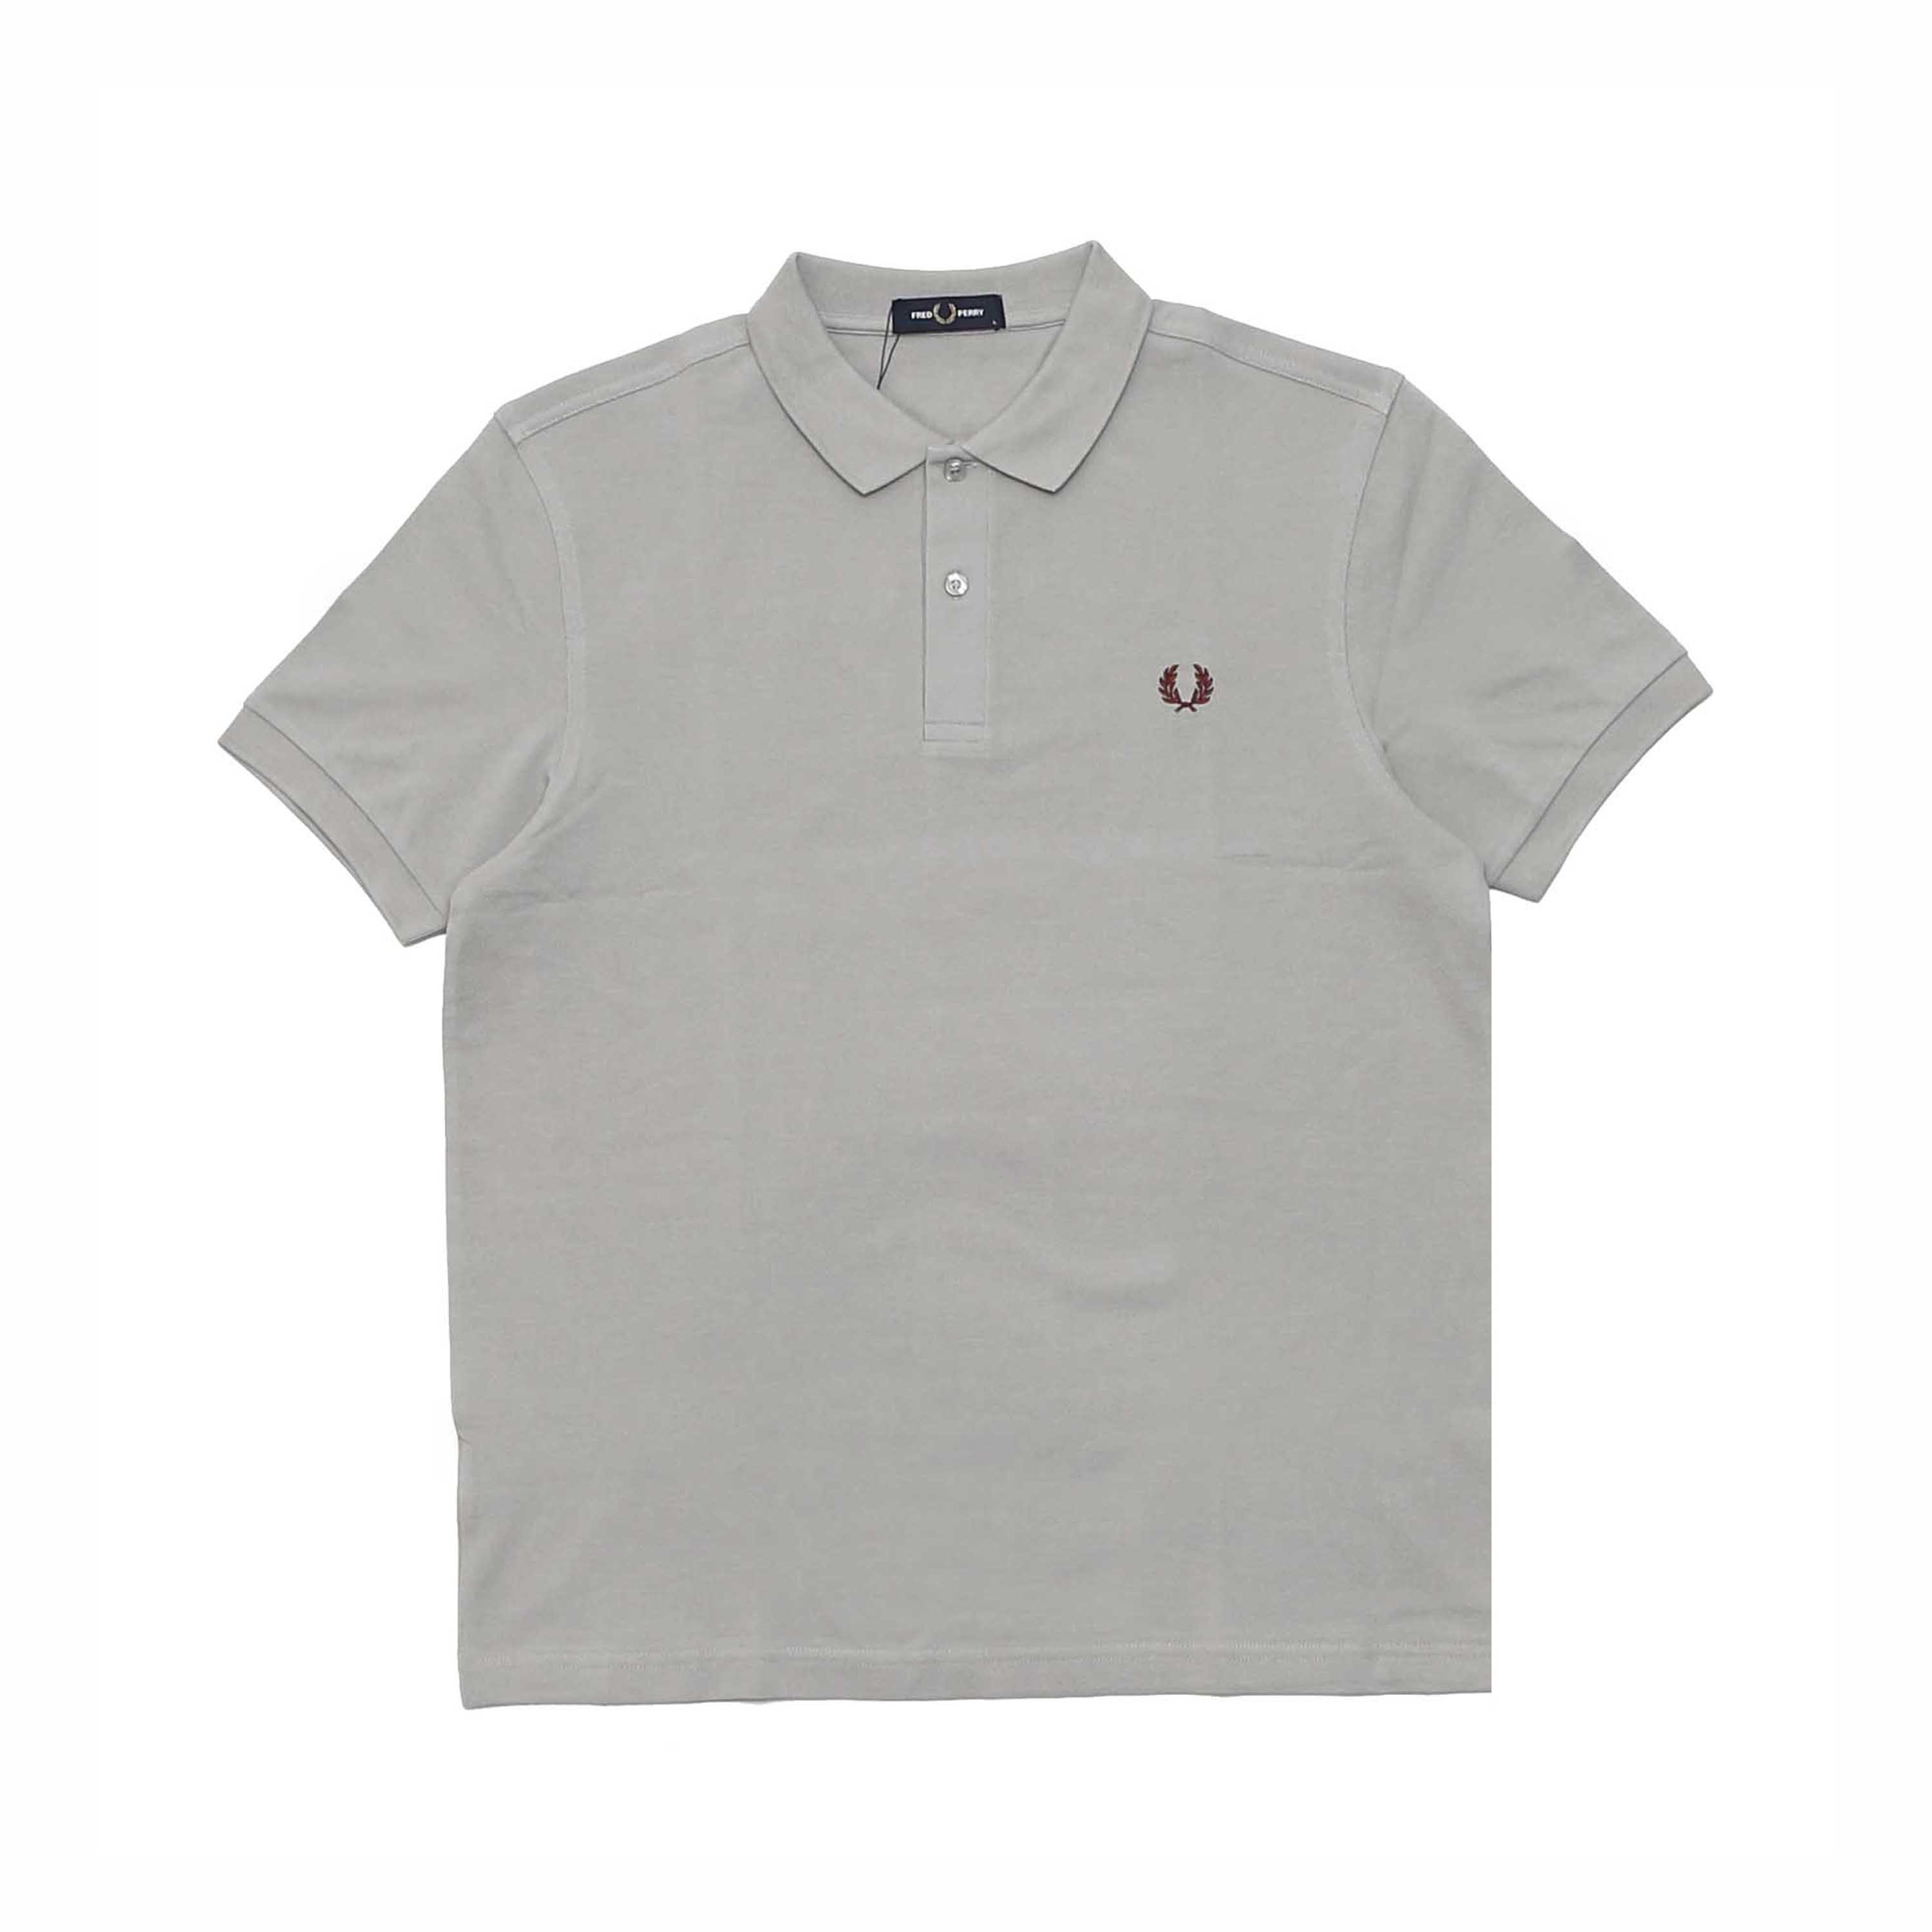 PLAIN FRED PERRY SHIRT - LIME STONE